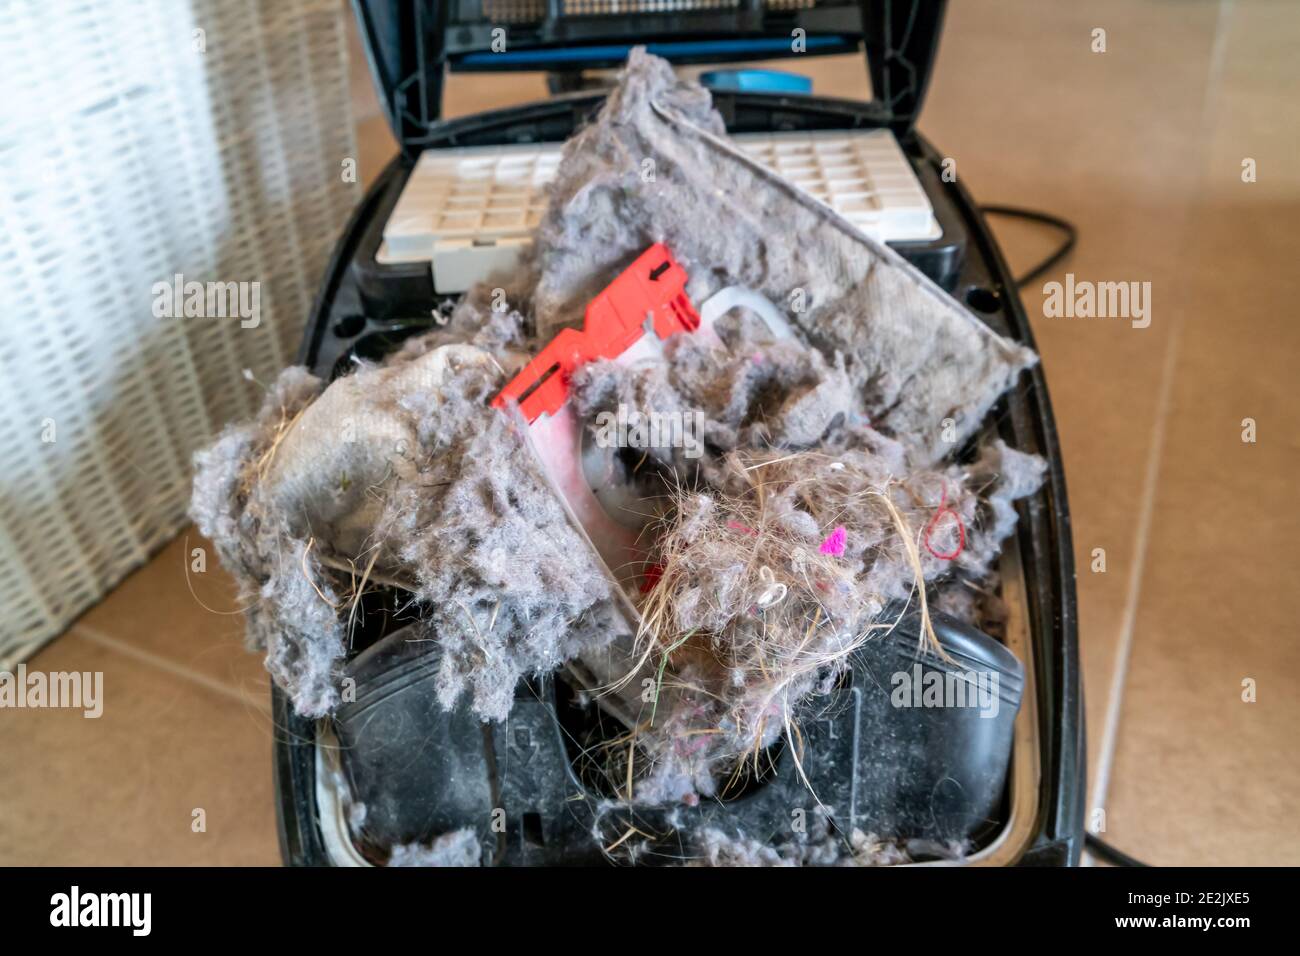 Exploded hoover dust bag producing much dirt. Stock Photo